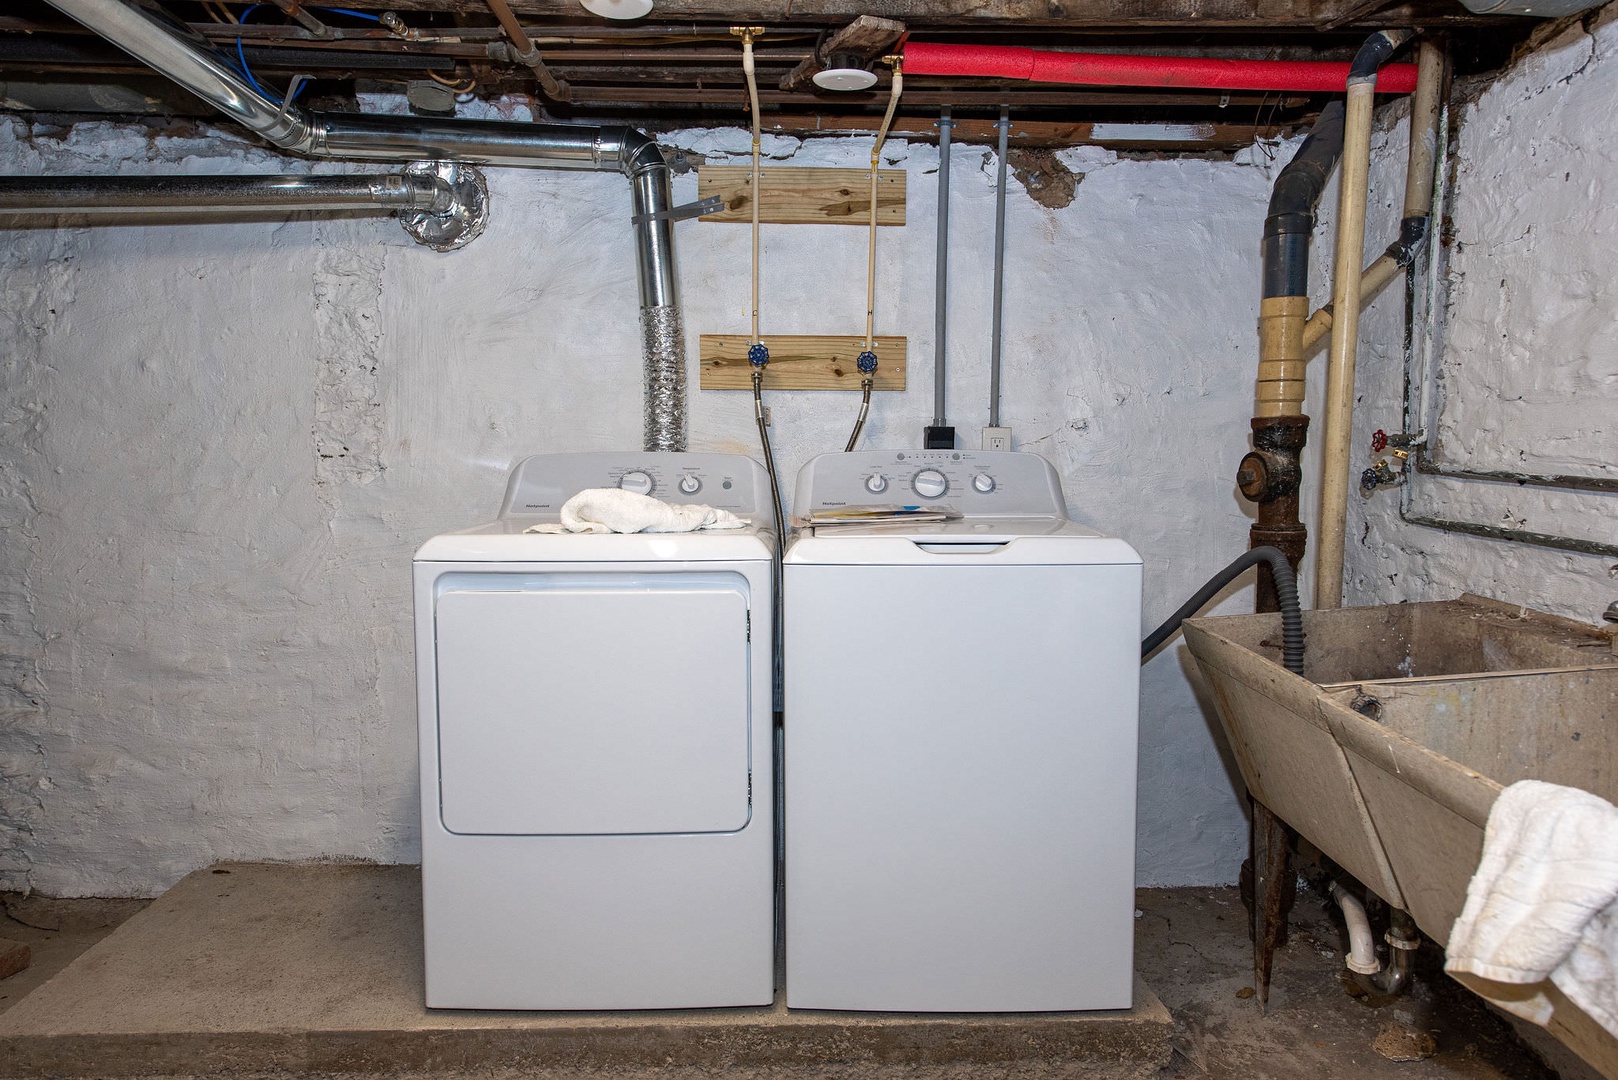 Private laundry is available for your stay, located in the basement